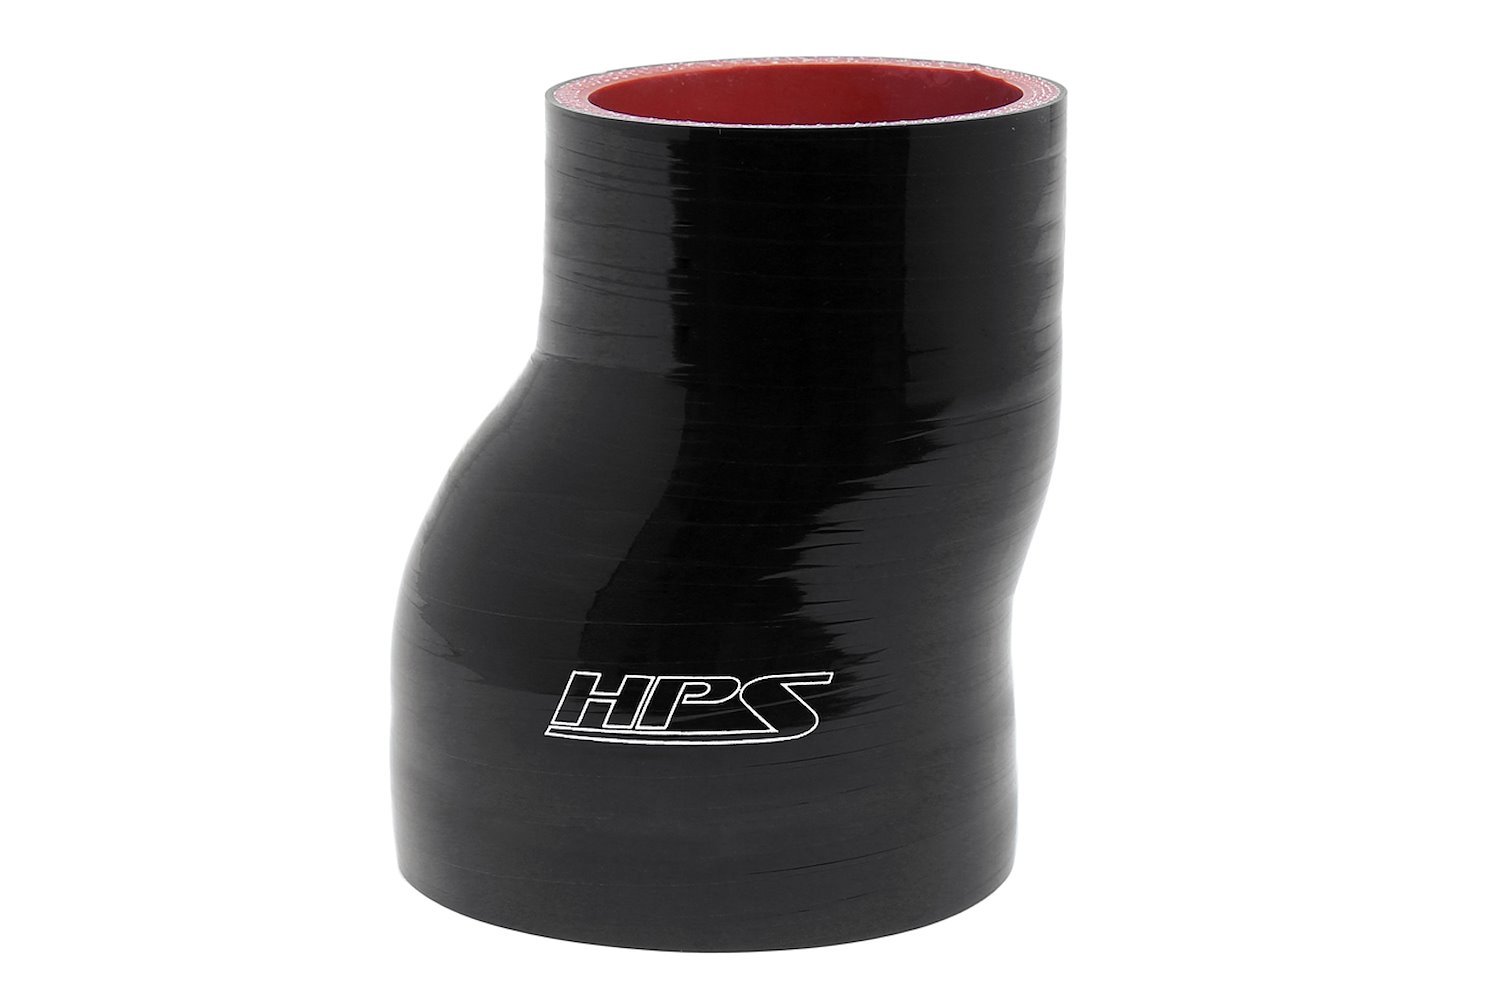 HTSOR-250-275-L6-BLK Offset Reducer, High-Temp 4-Ply Reinforced, 2 1/2 in. ID To 2 3/4 in. ID, 6 in. Length.